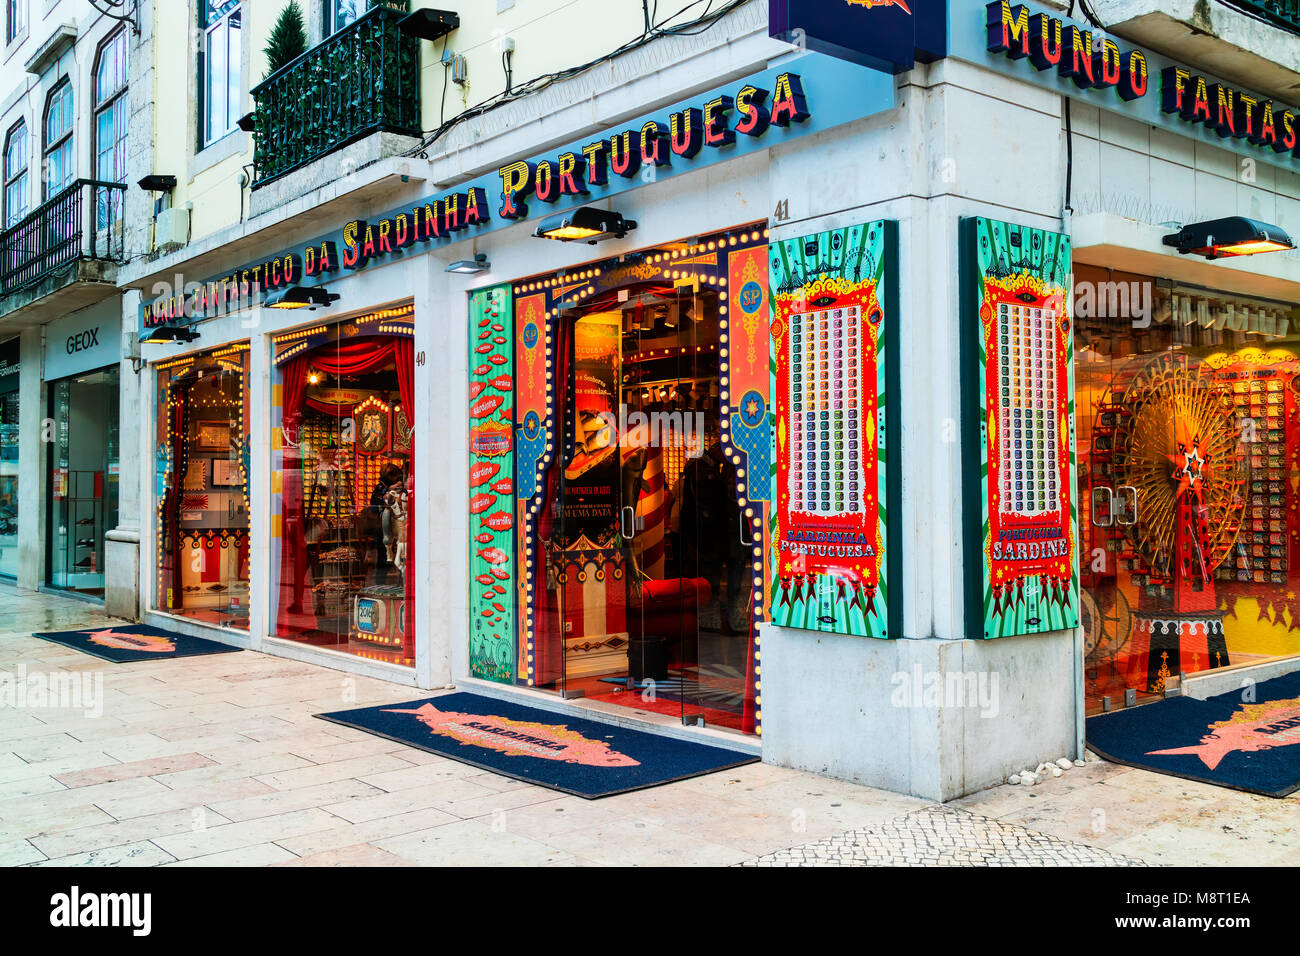 The Fantastic World Of Portuguese Sardines - specialised sardine shop in Lisbon, Portugal opened by Murtosa Canning Factory. Stock Photo